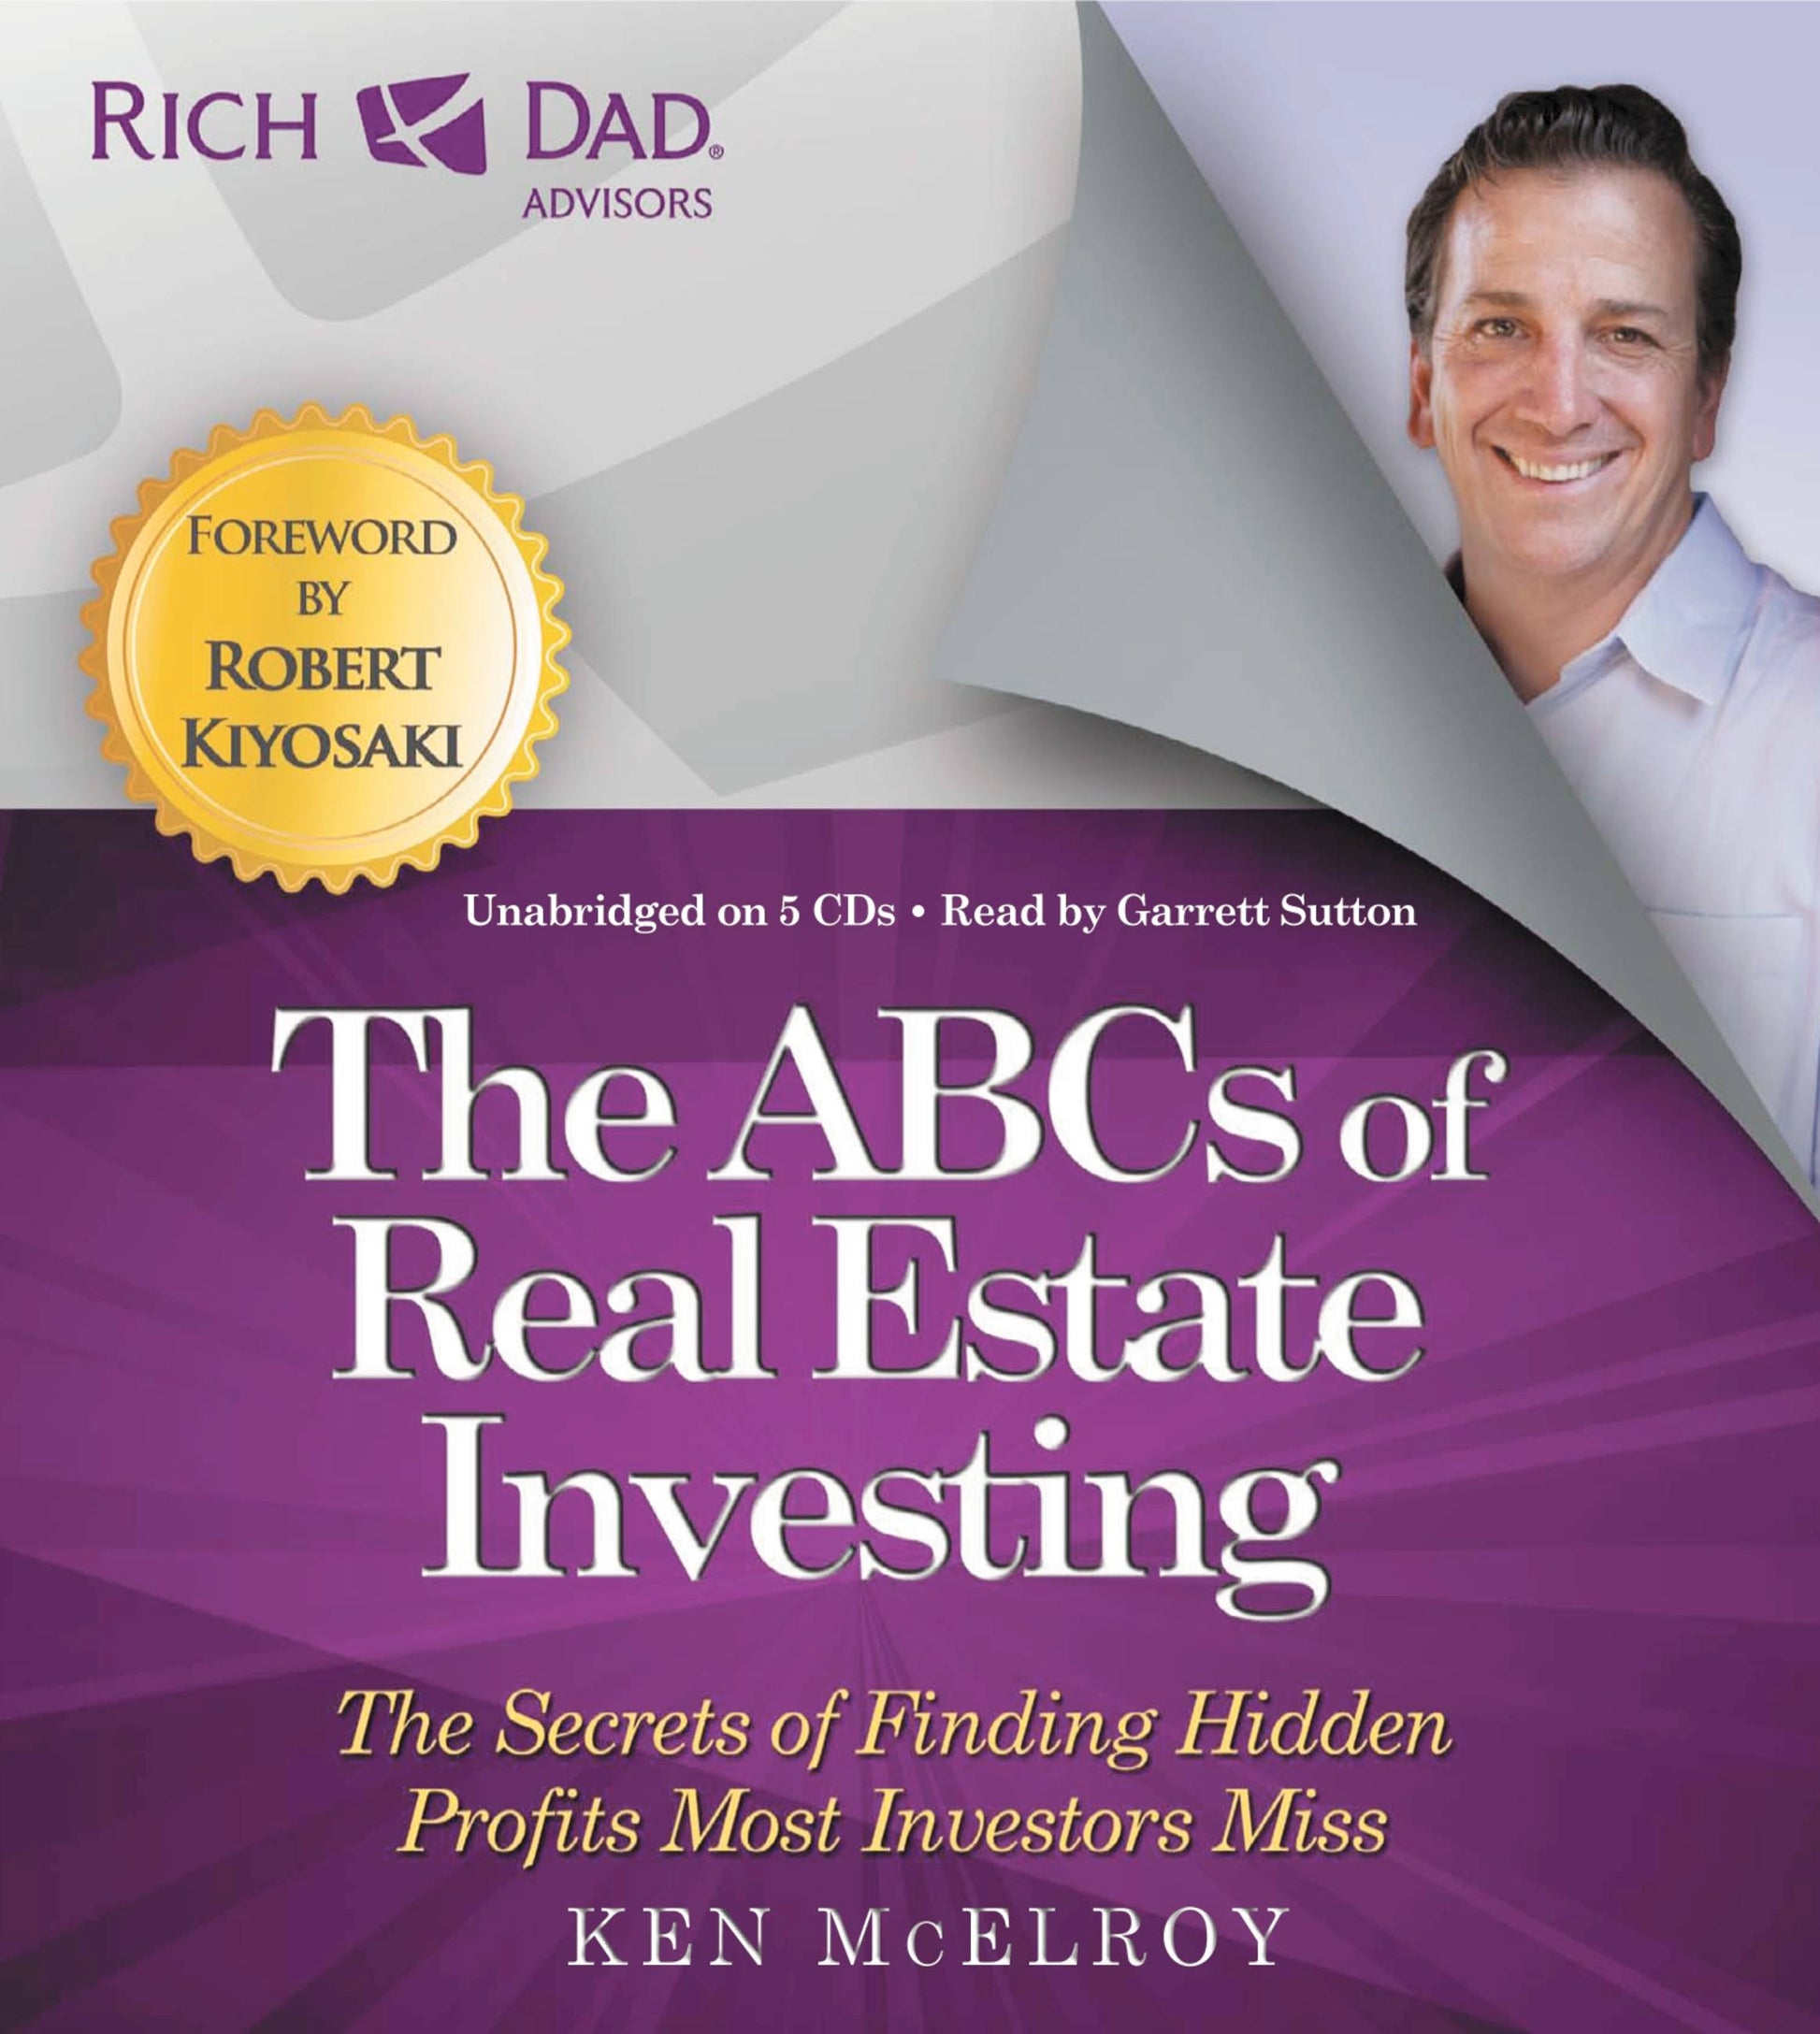 The ABCs of Real Estate Investing by Ken McElroy at BIBLIONEPAL Bookstore